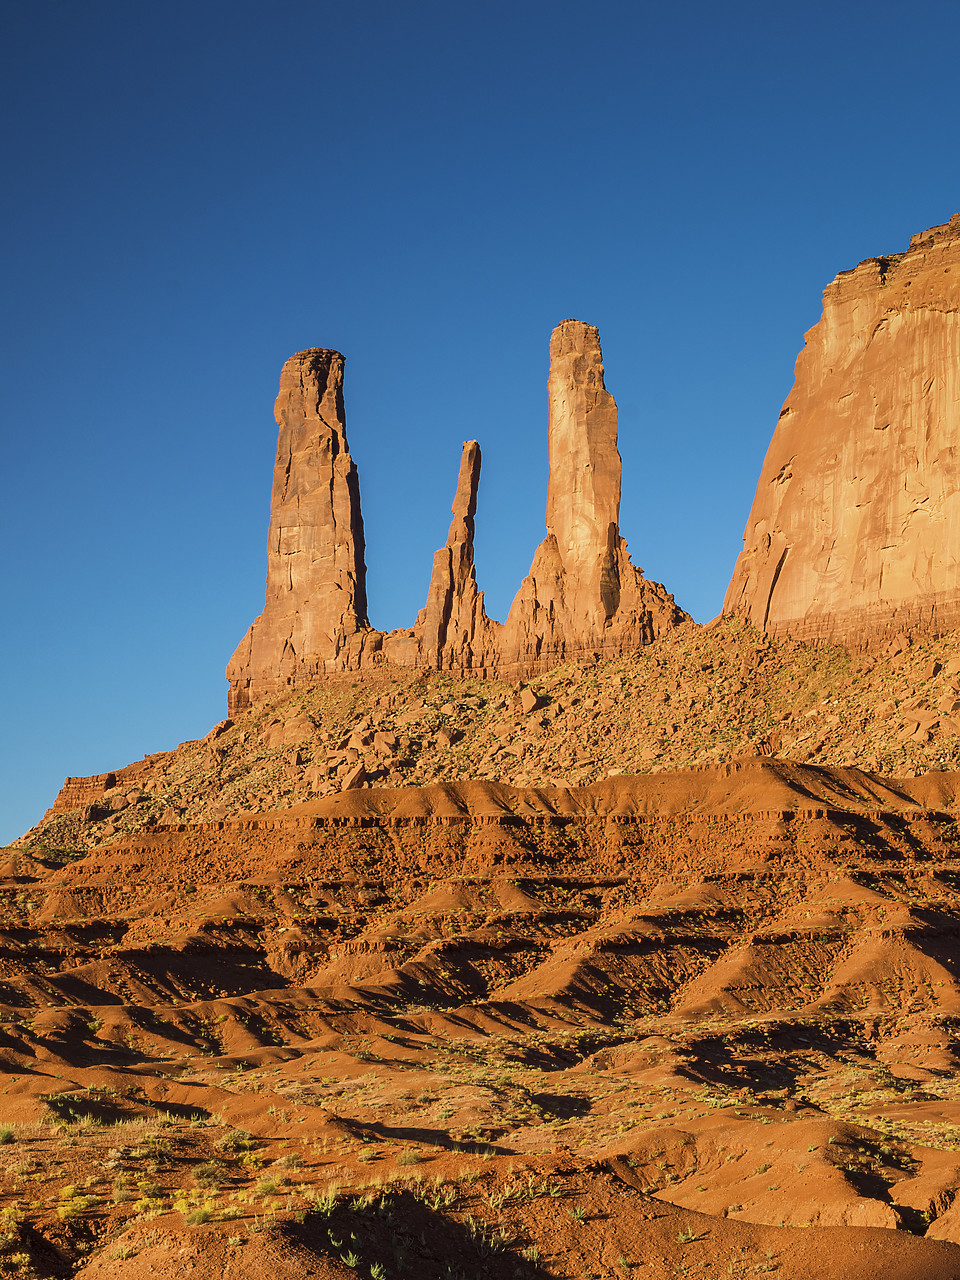 #150420-2 - Three Sisters Butte, Monument Valley Tribal Park, Arizona, USA